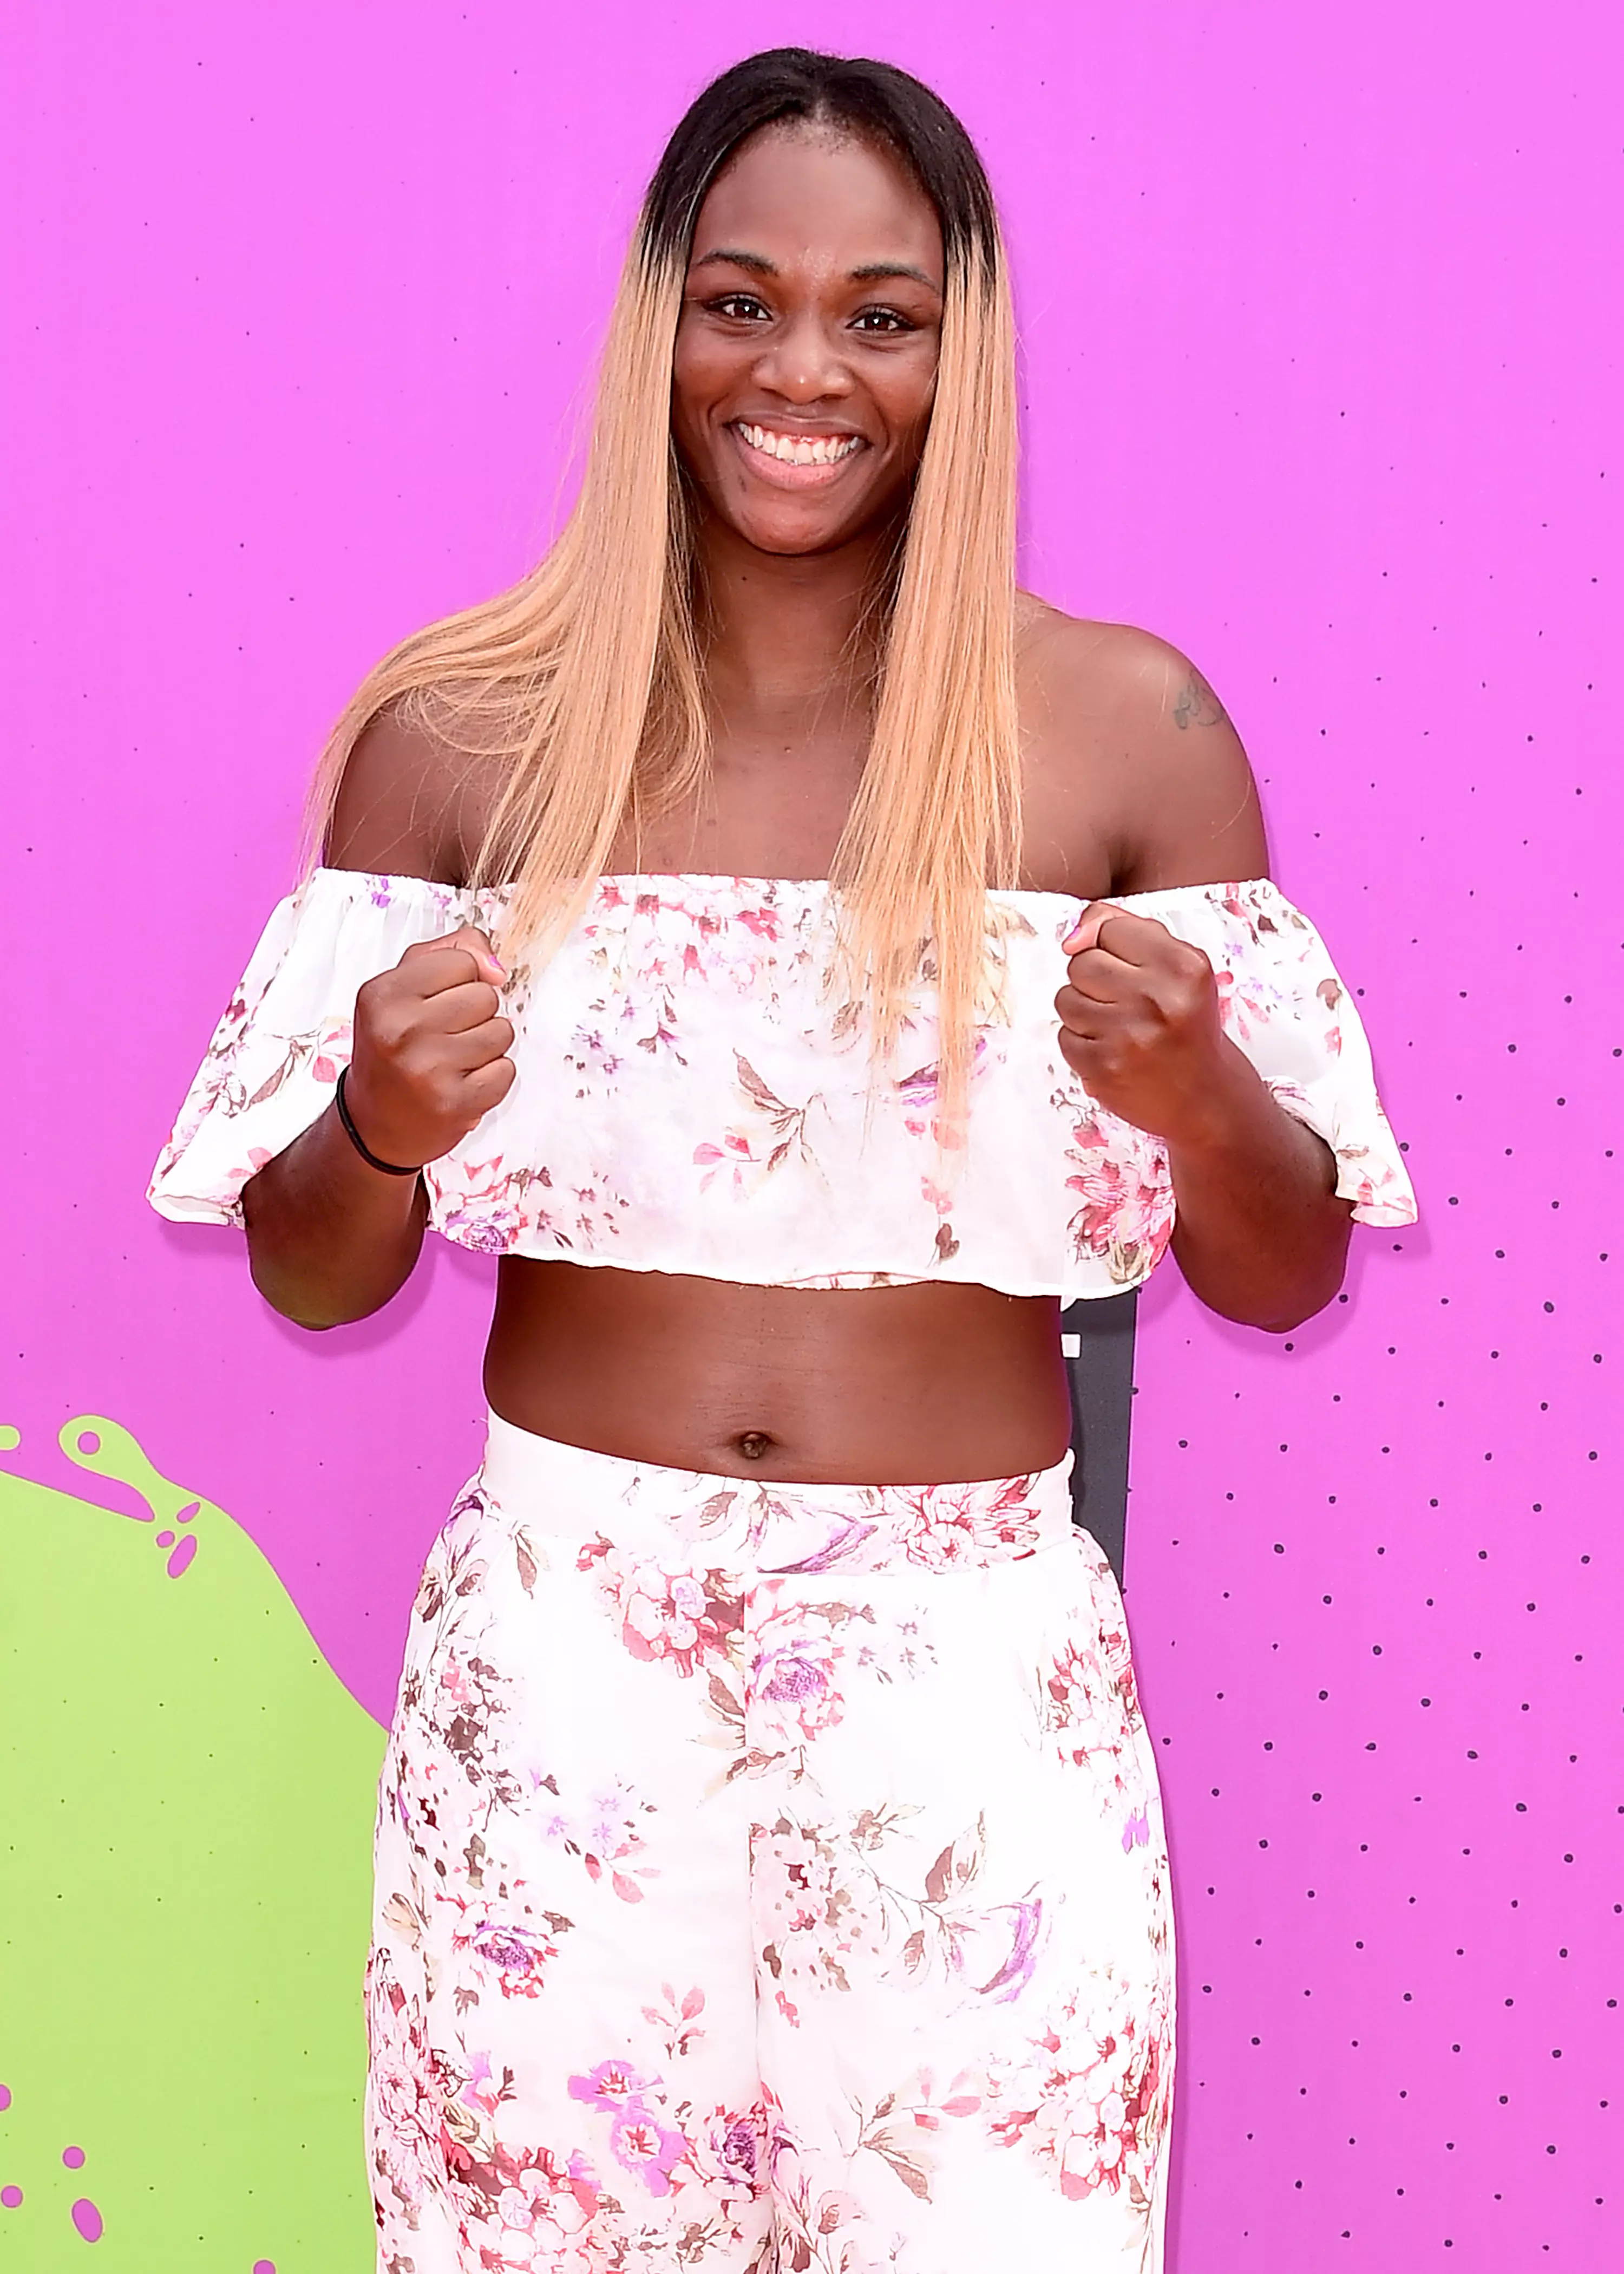 Boxing champ Claressa Shields says she could whoop Jake Paul.